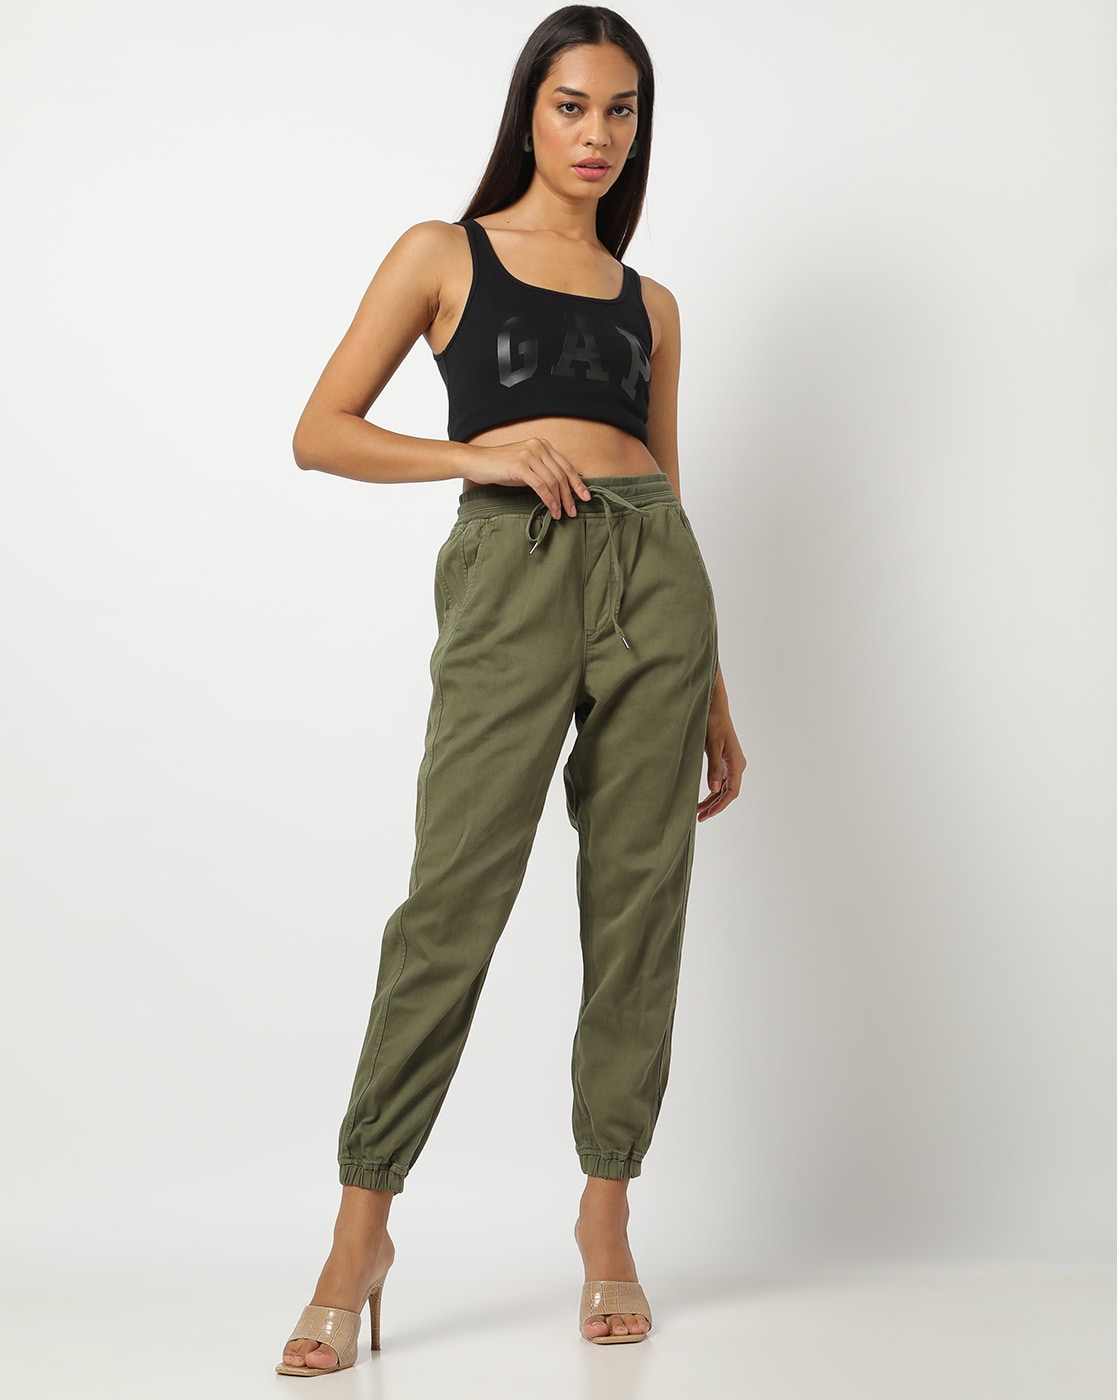 Cotton Track Pants For Women Regular Fit Lounge Pants Lowers Olive Green   Cupid Clothings